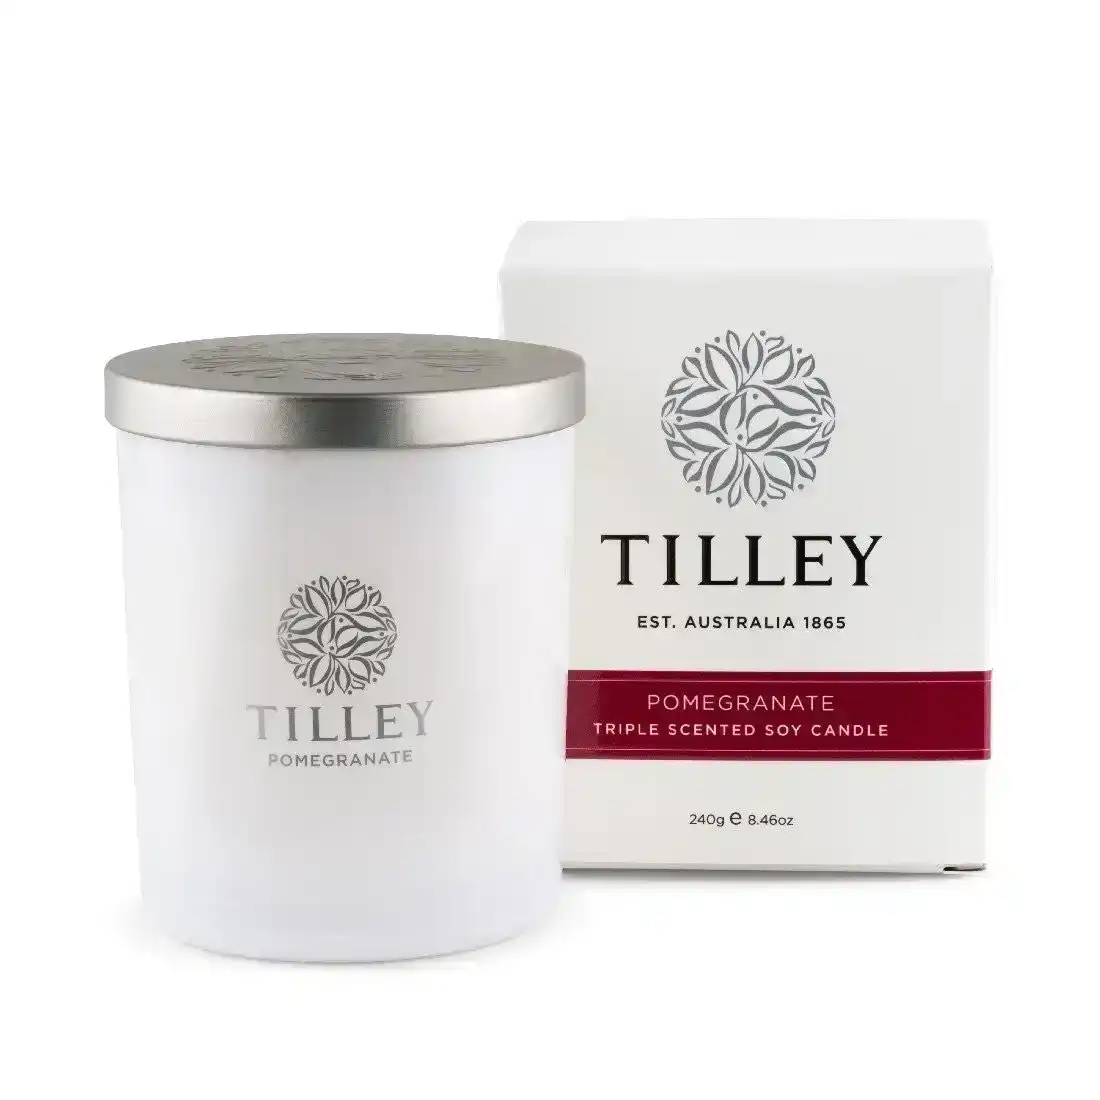 Tilley Classic White - Soy Candle 240g - Pomegranate